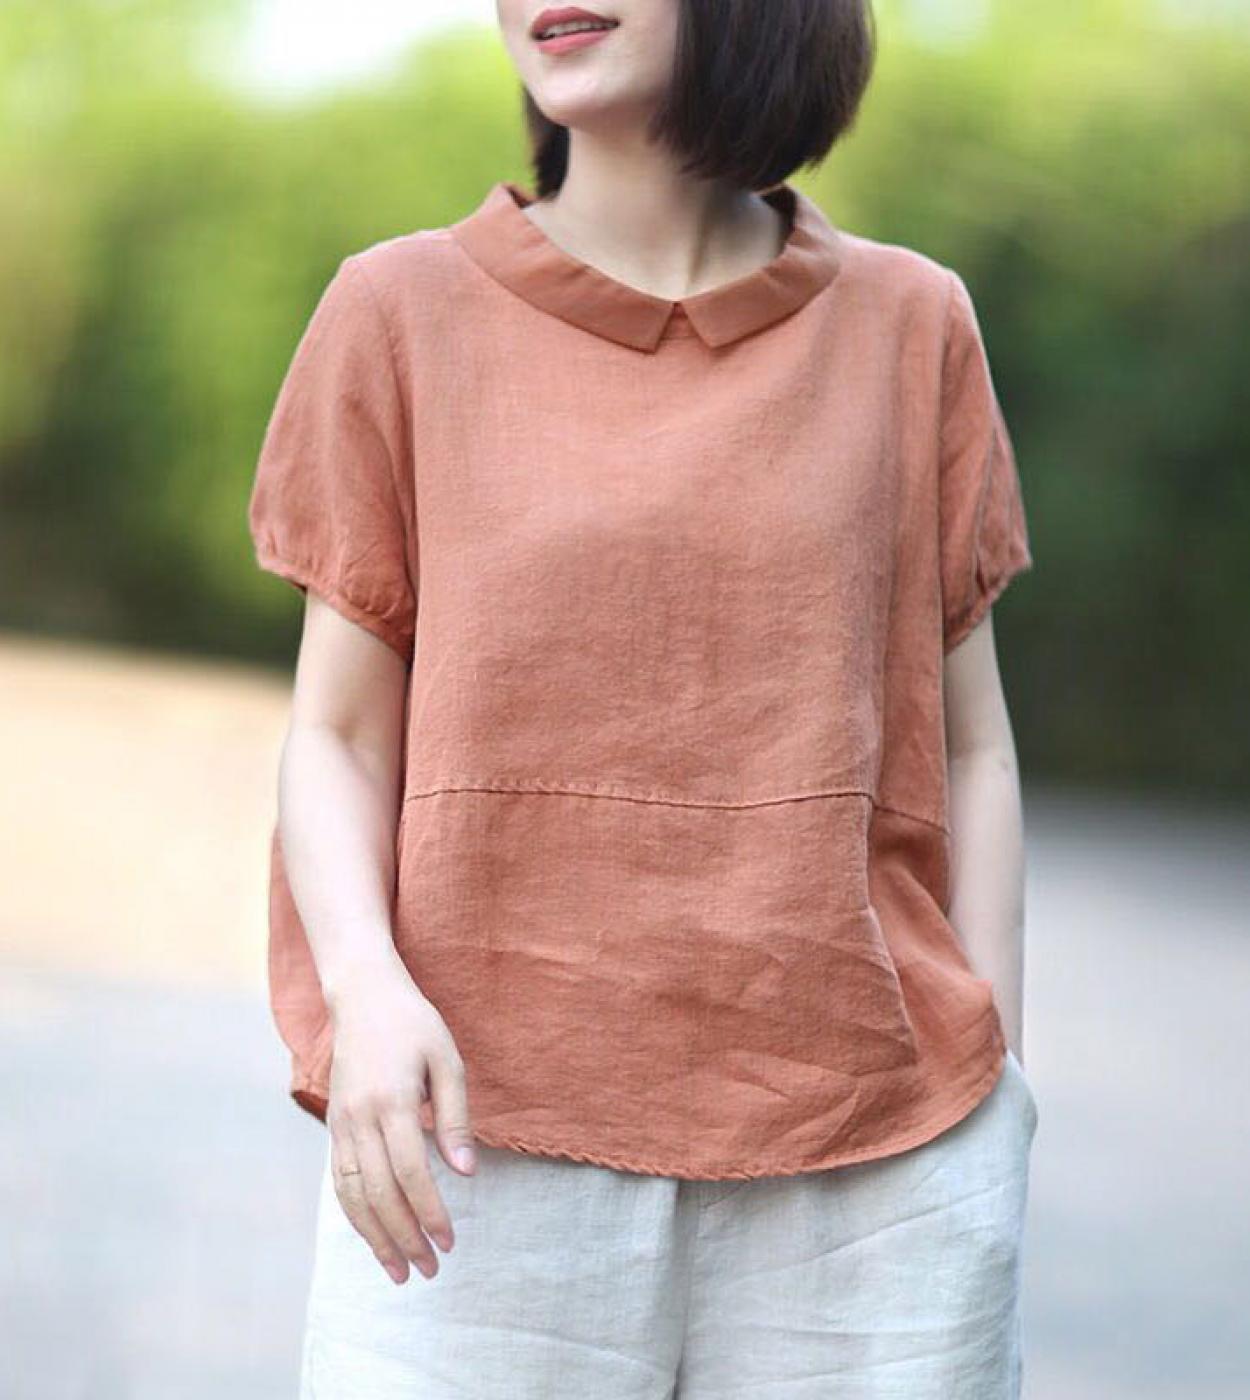 Fje Summer Women Shirt Plus Size Loose Casual Short Sleeve Peter Pan Collar Patchwork Linen Tops Vintage Female Blouse 